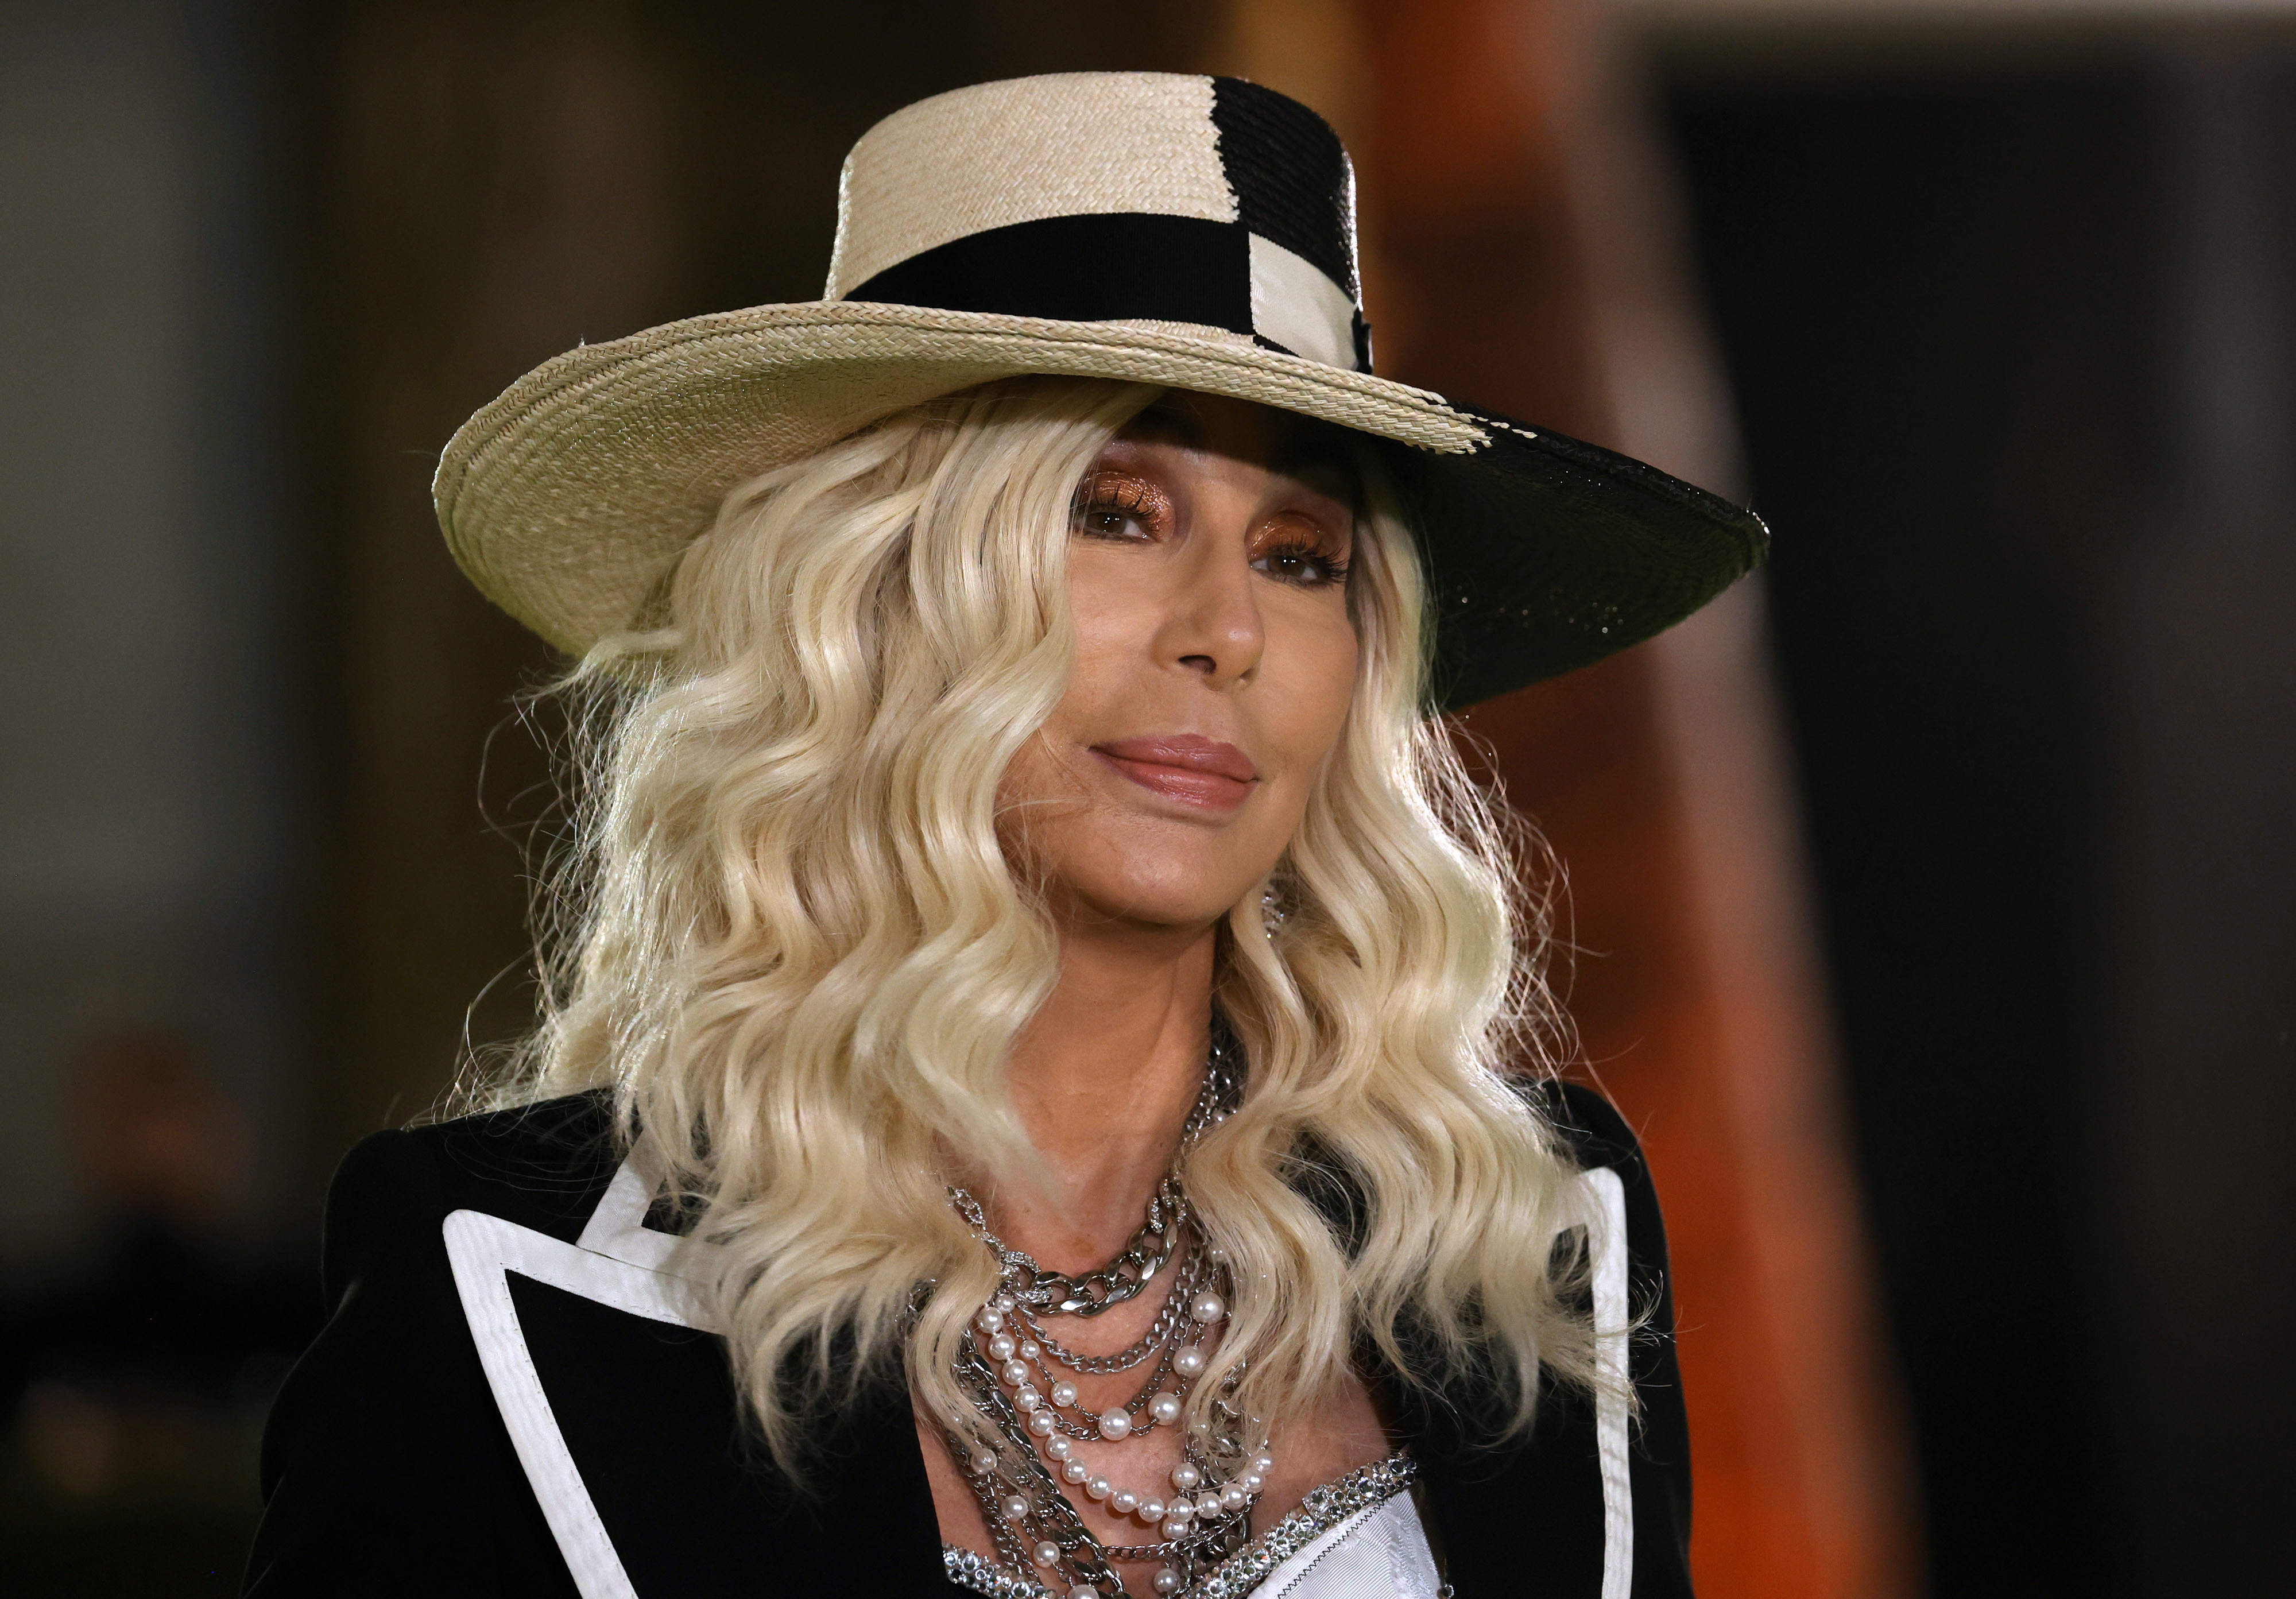 Cher in Los Angeles, California on September 25, 2021 | Source: Getty Images